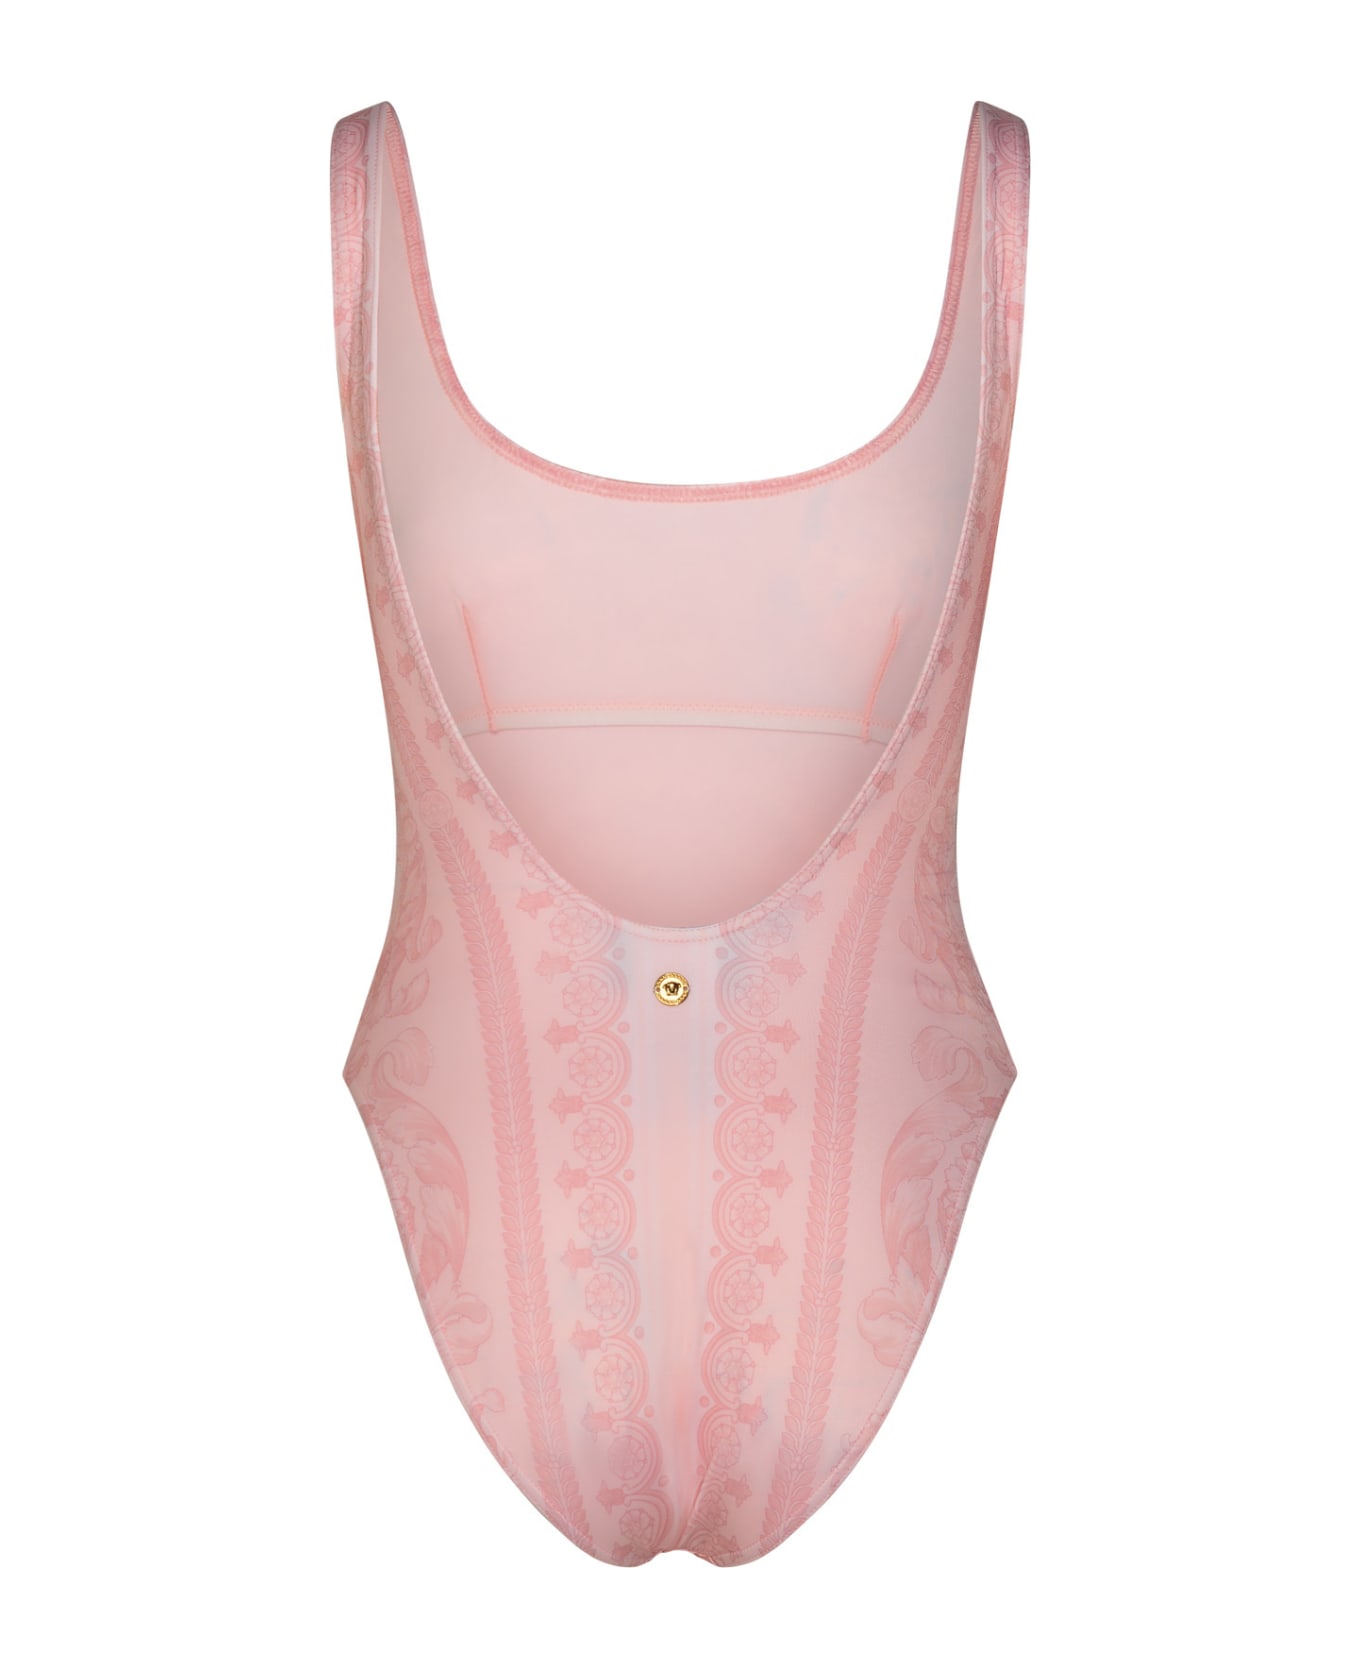 Versace 'barocco' One-piece Swimsuit In Pink Polyester Blend - Pale Pink 水着